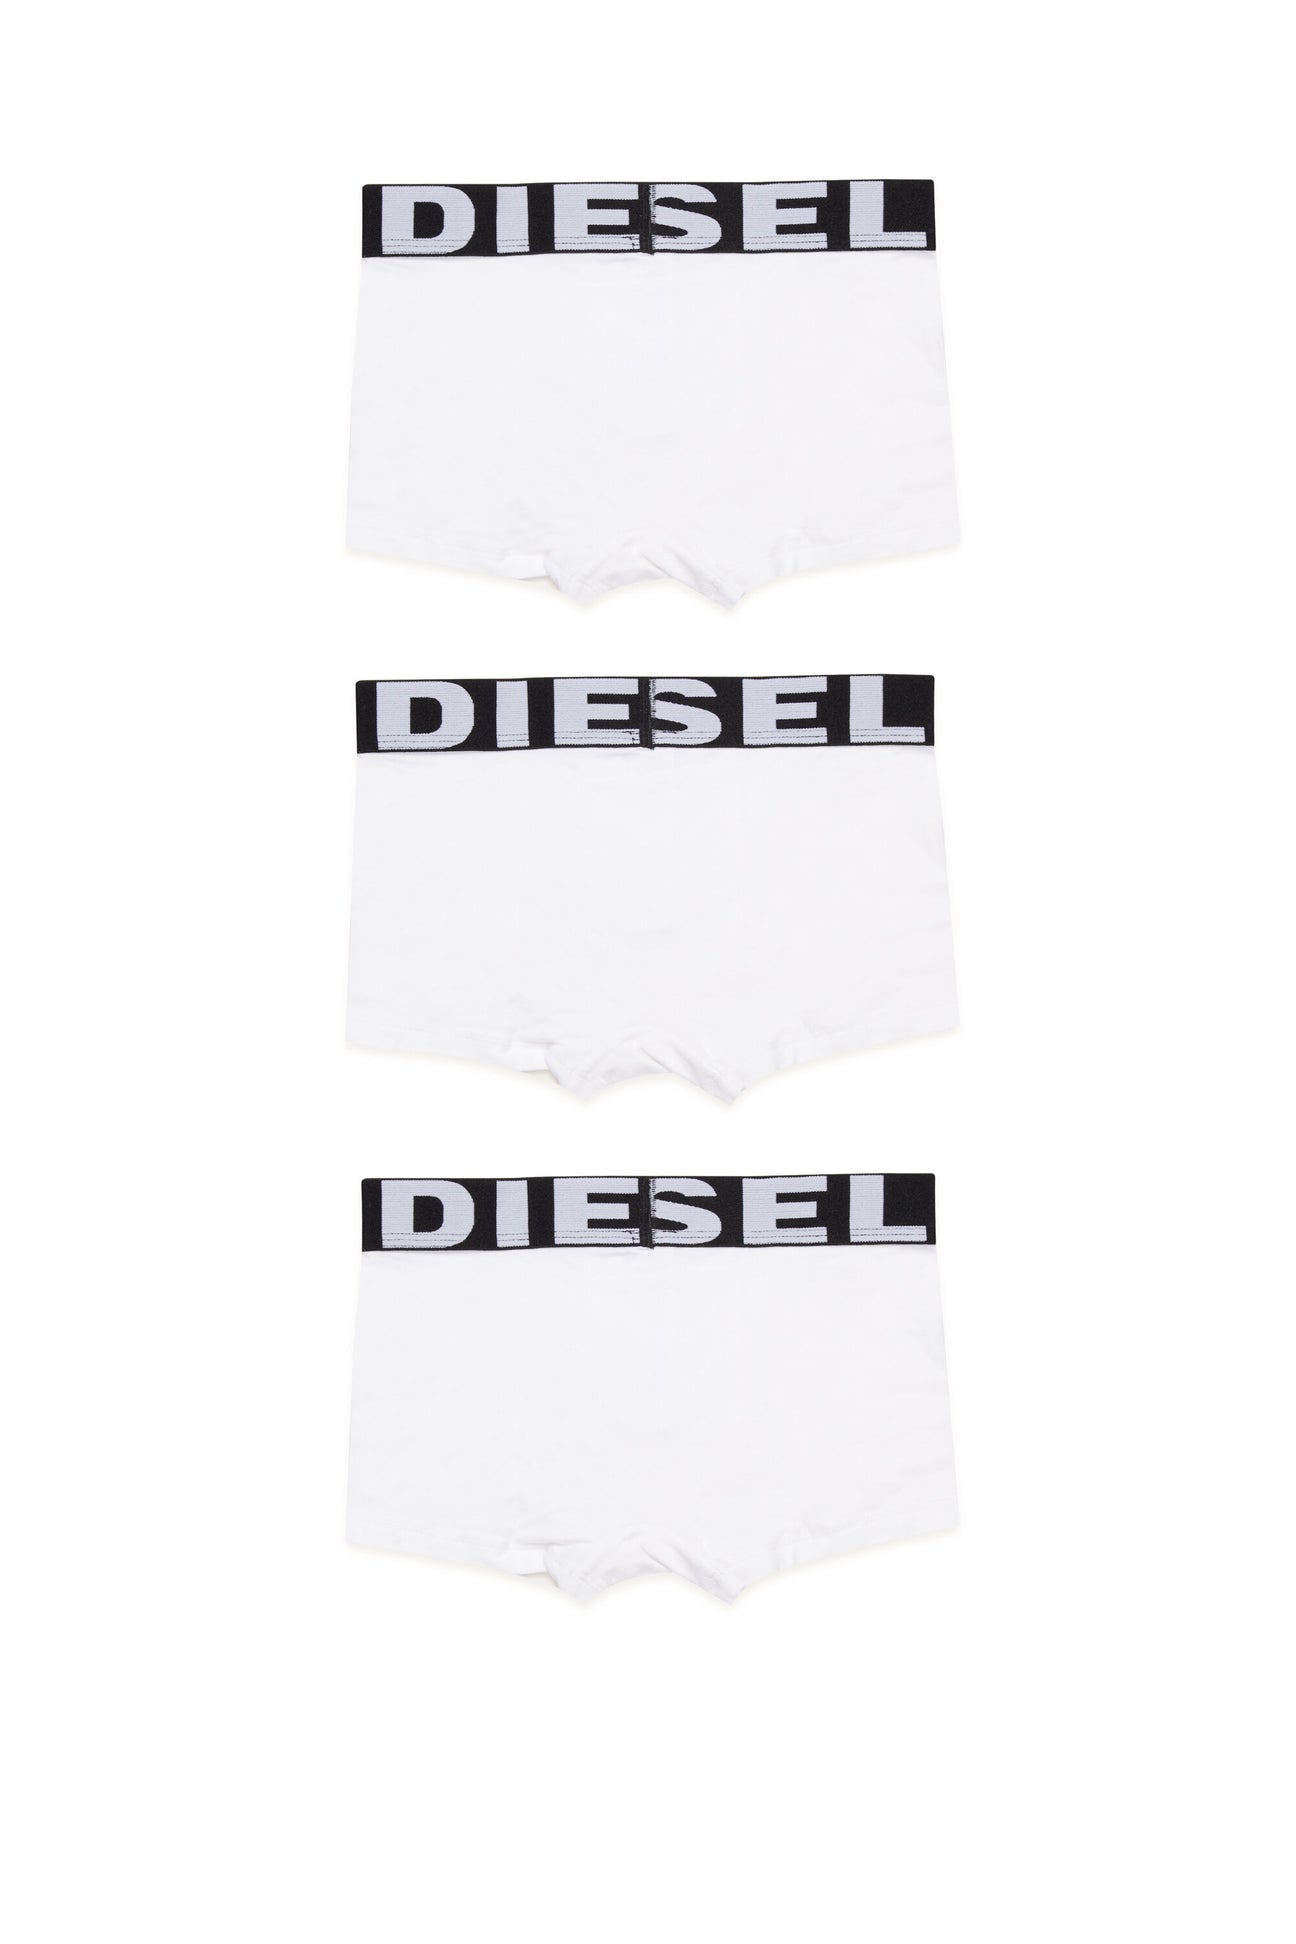 Branded jersey boxer shorts - 3 pairs Branded jersey boxer shorts - 3 pairs